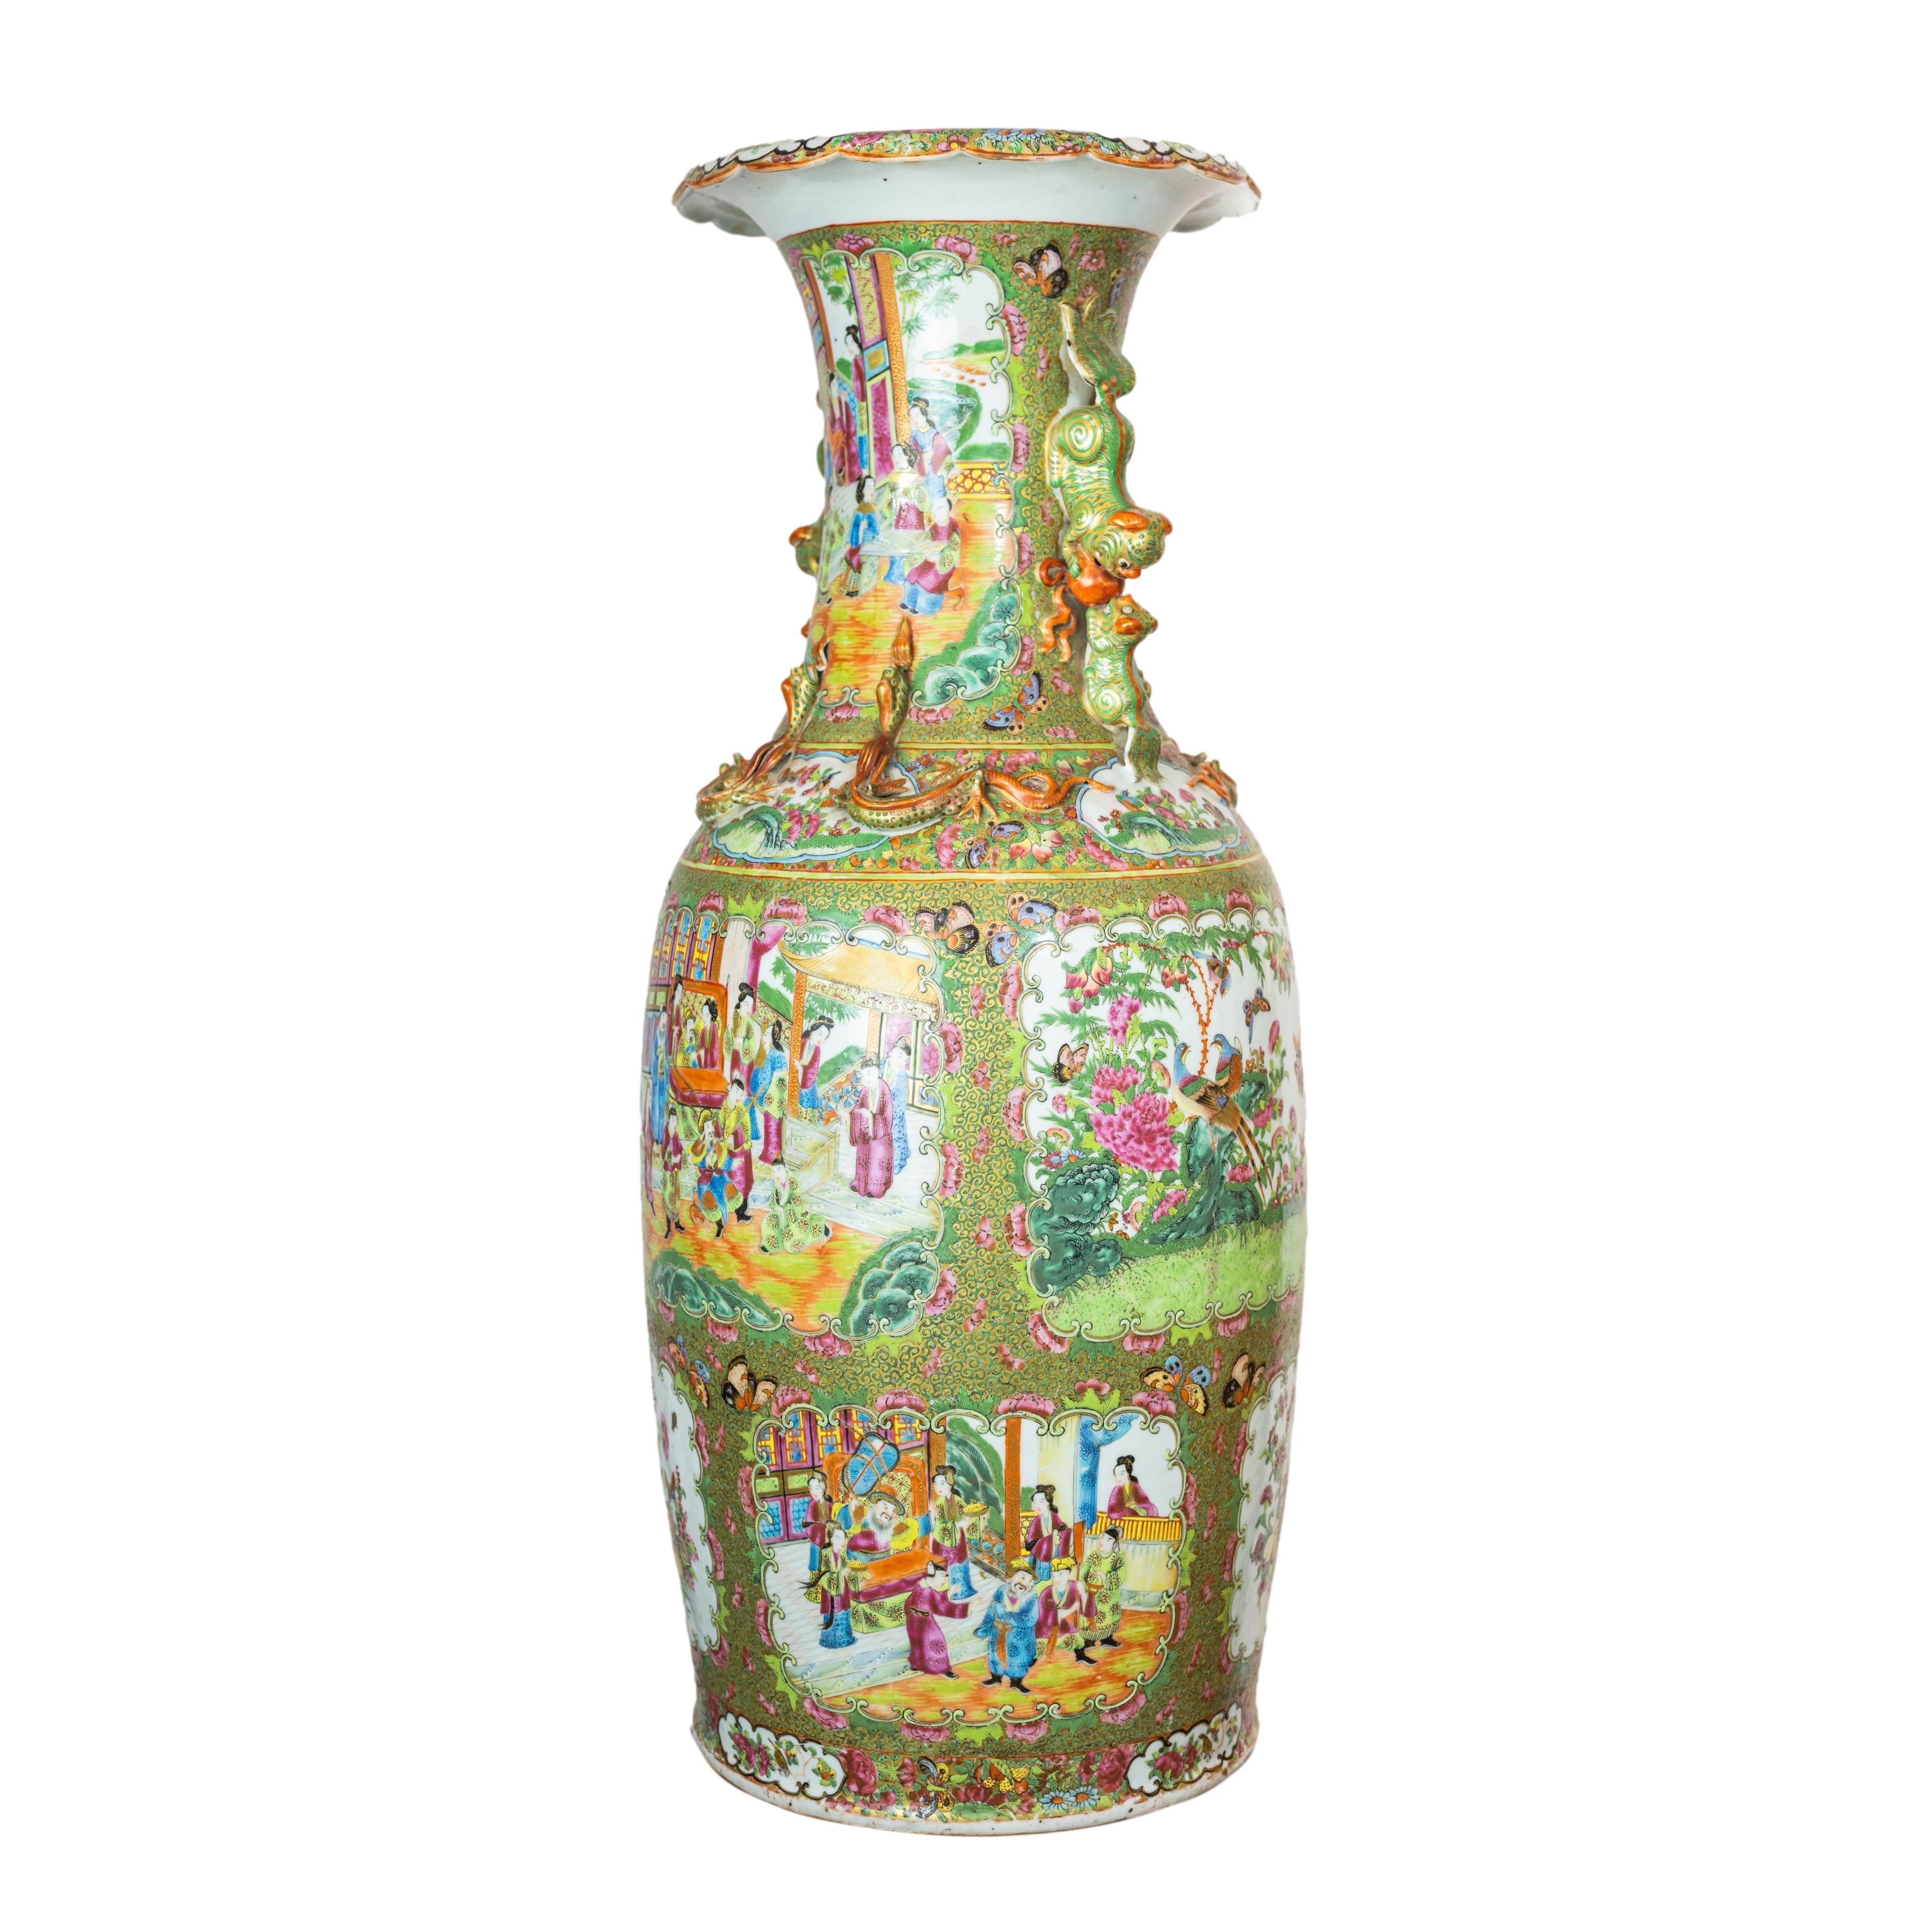 A large Canton Famille rose baluster vase, of baluster form, with a tall waisted neck, an everted scalloped rim, the neck and shoulders with applied paired confronting Foo lions and cubs forming the handles, the shoulders with enameled and gilded